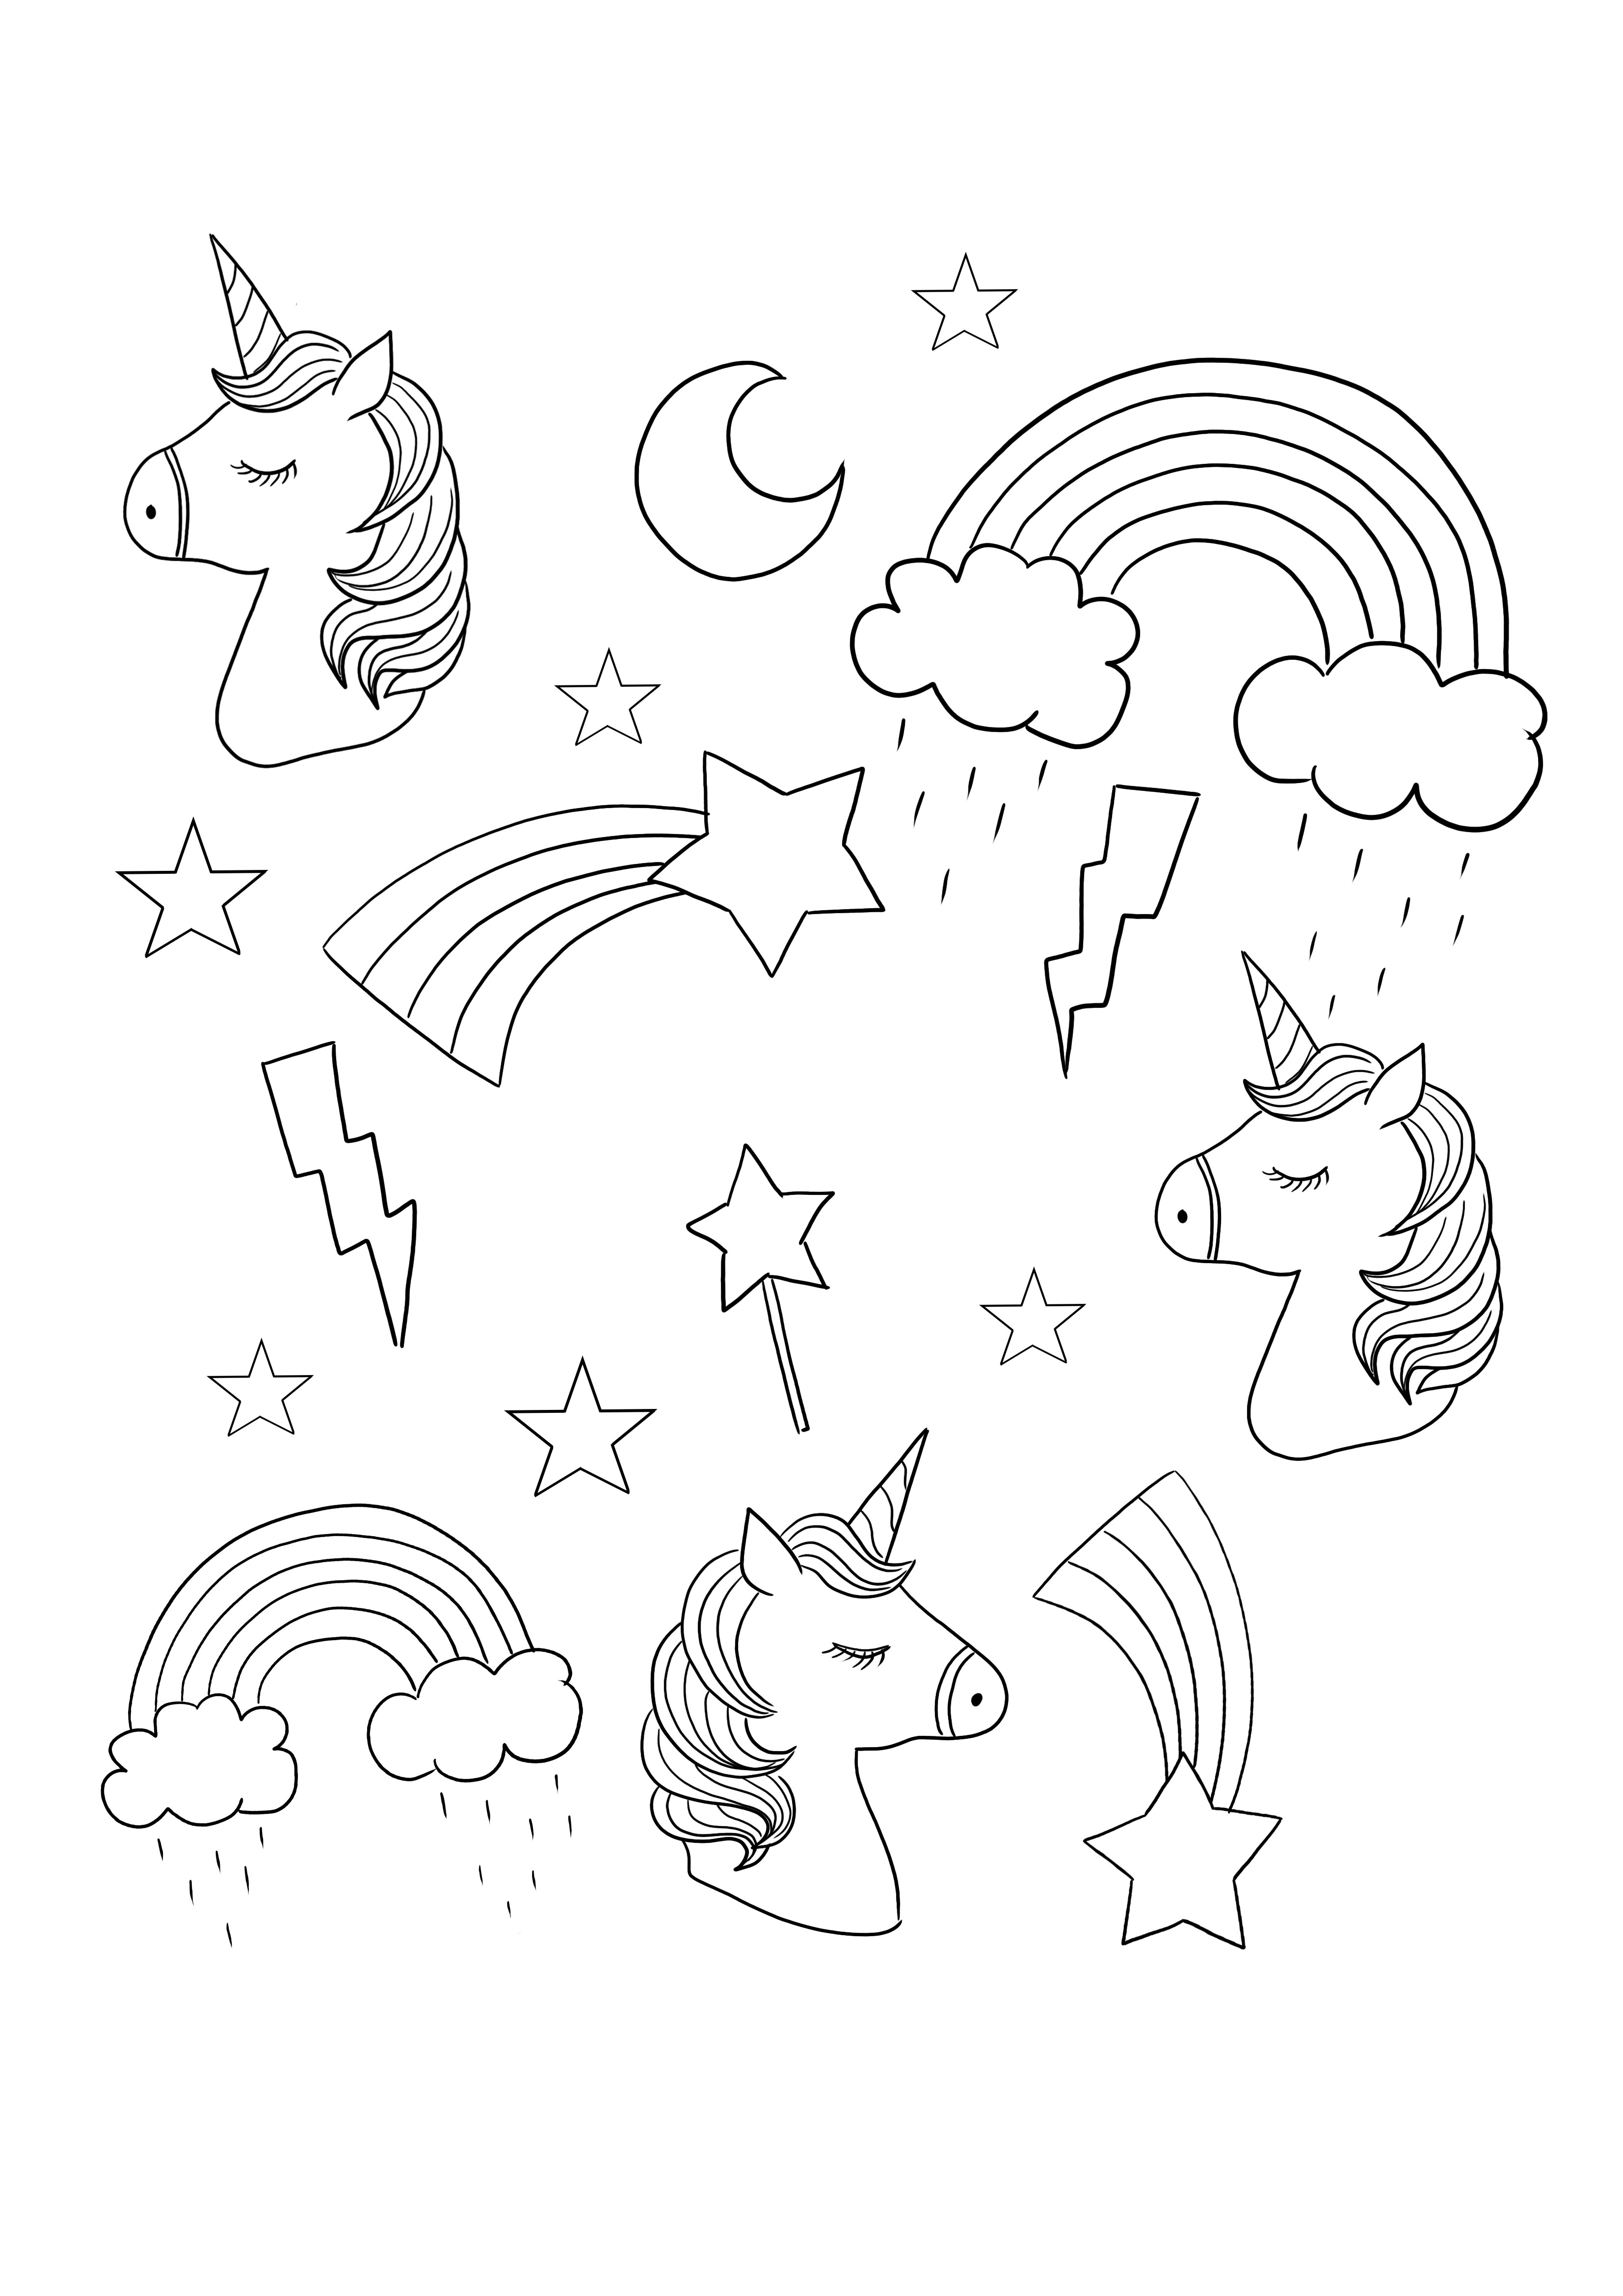 Easy printable coloring sheet of Unicorn stickers for all ages